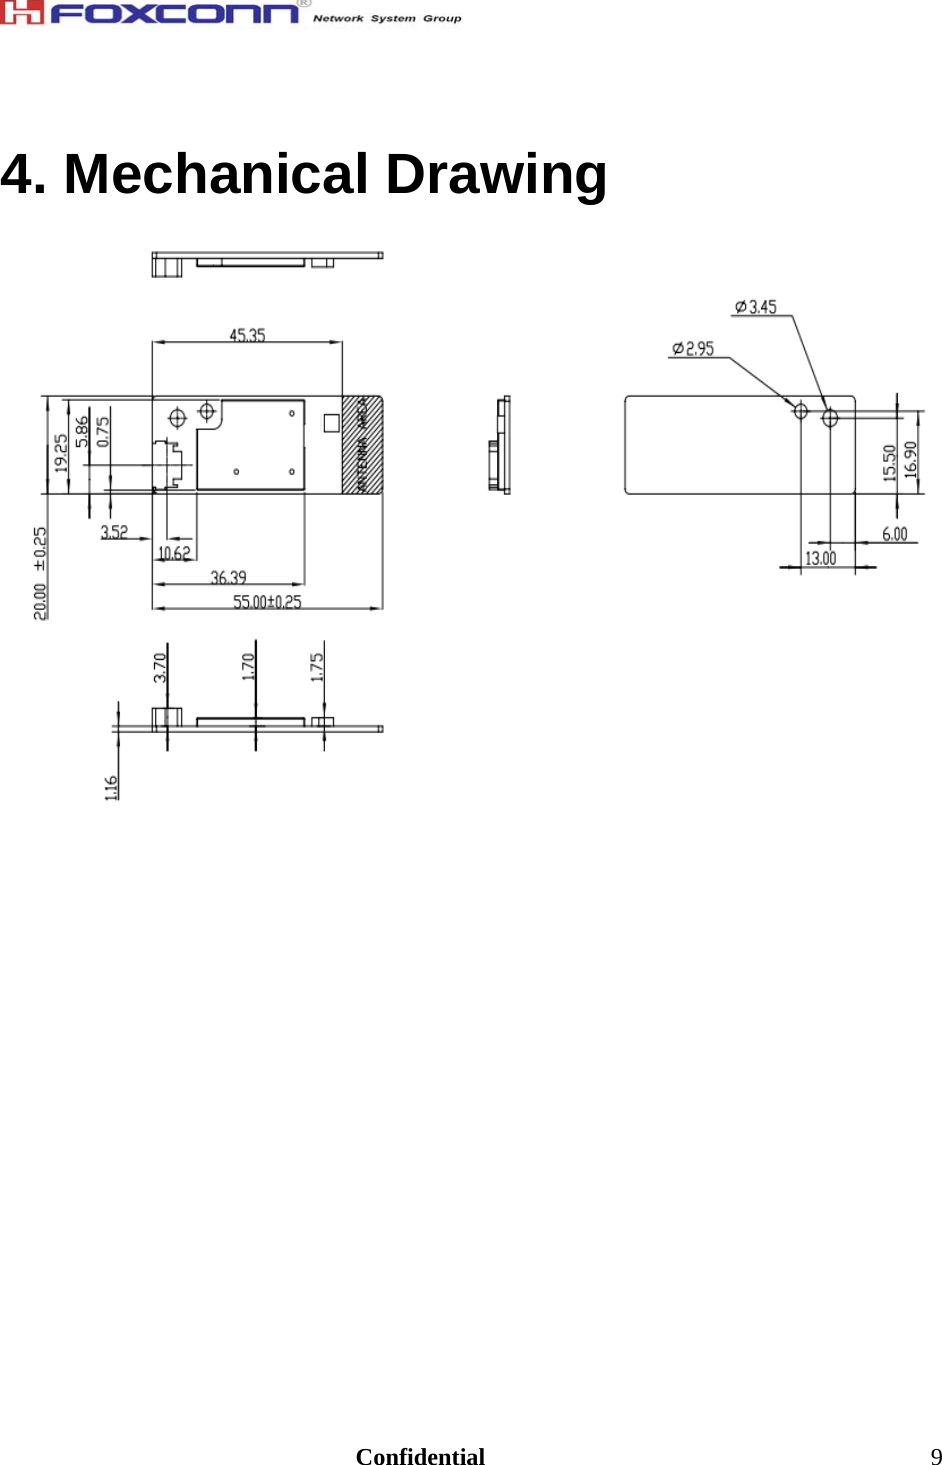                                                                               Confidential  94. Mechanical Drawing                        